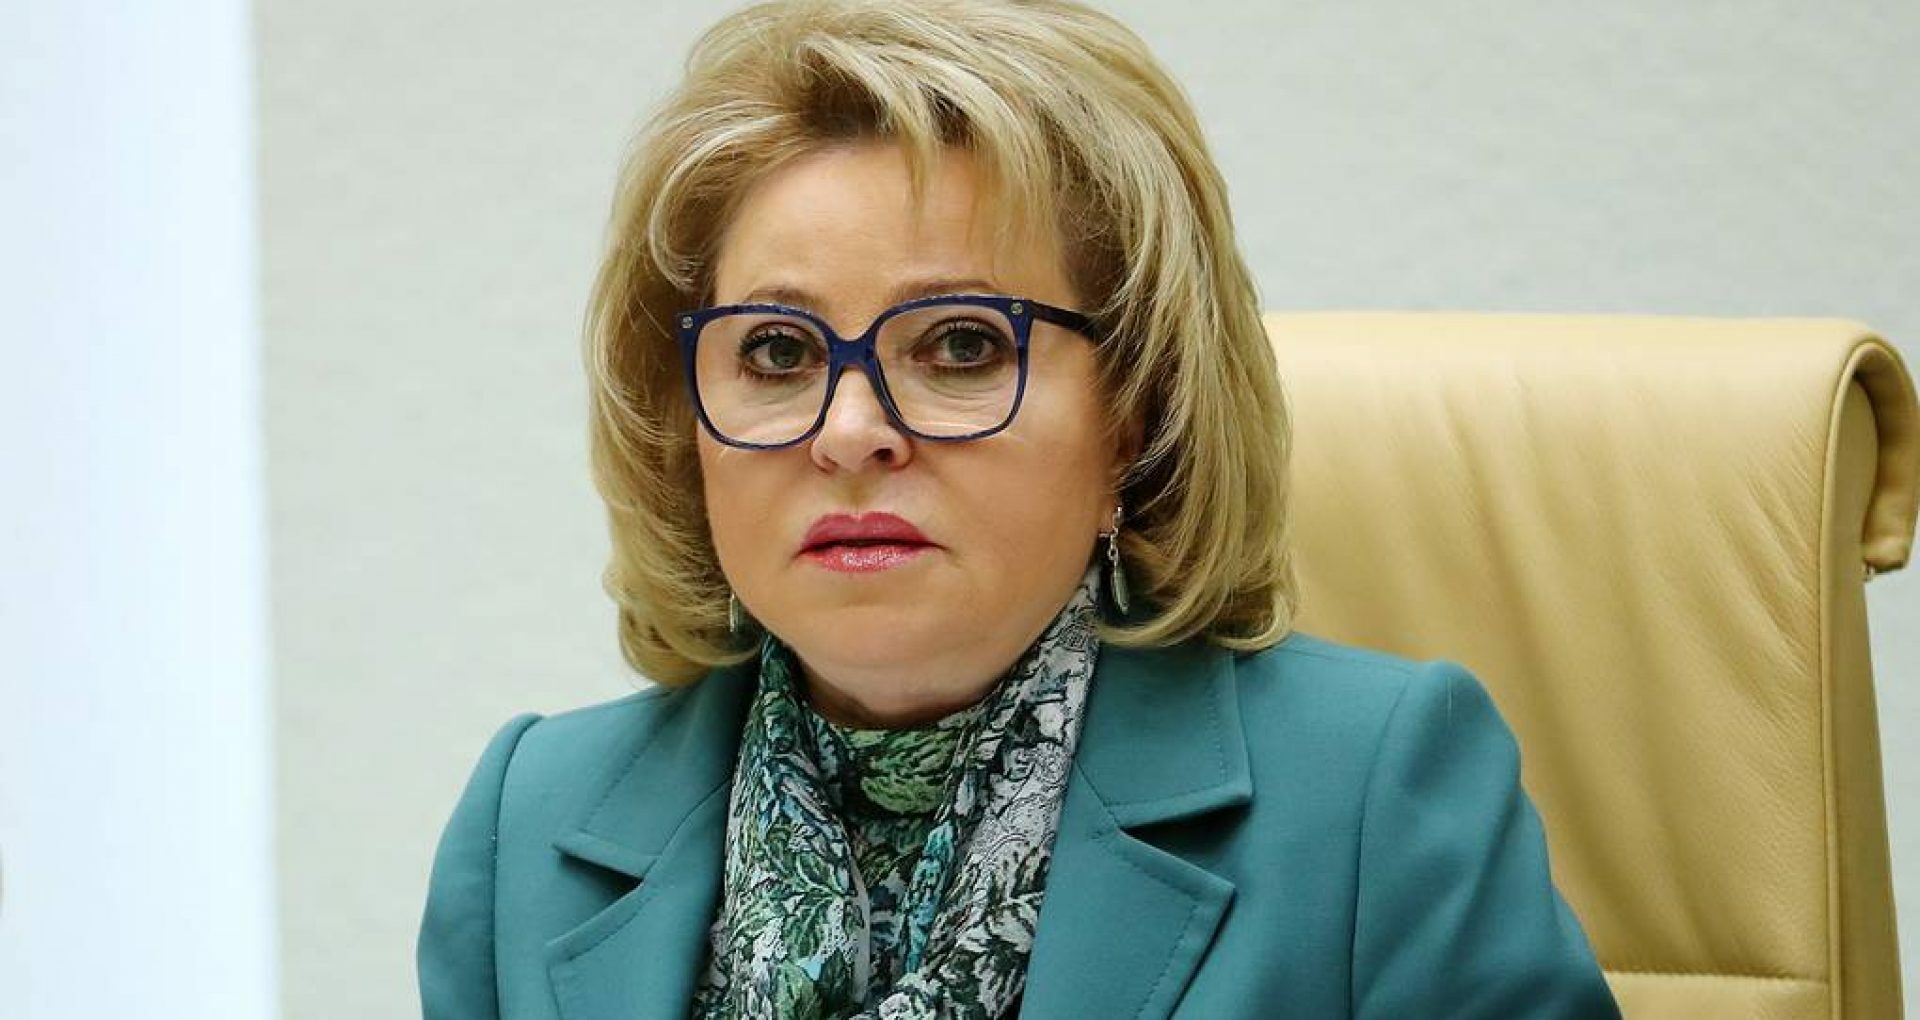 President of Russia’s Council of the Federal Assembly: ”Maia Sandu’s participation at the anti-Russian event, the so-called Crimean Platform, will be taken into account in establishing bilateral relations between Moscow and Chișinău”